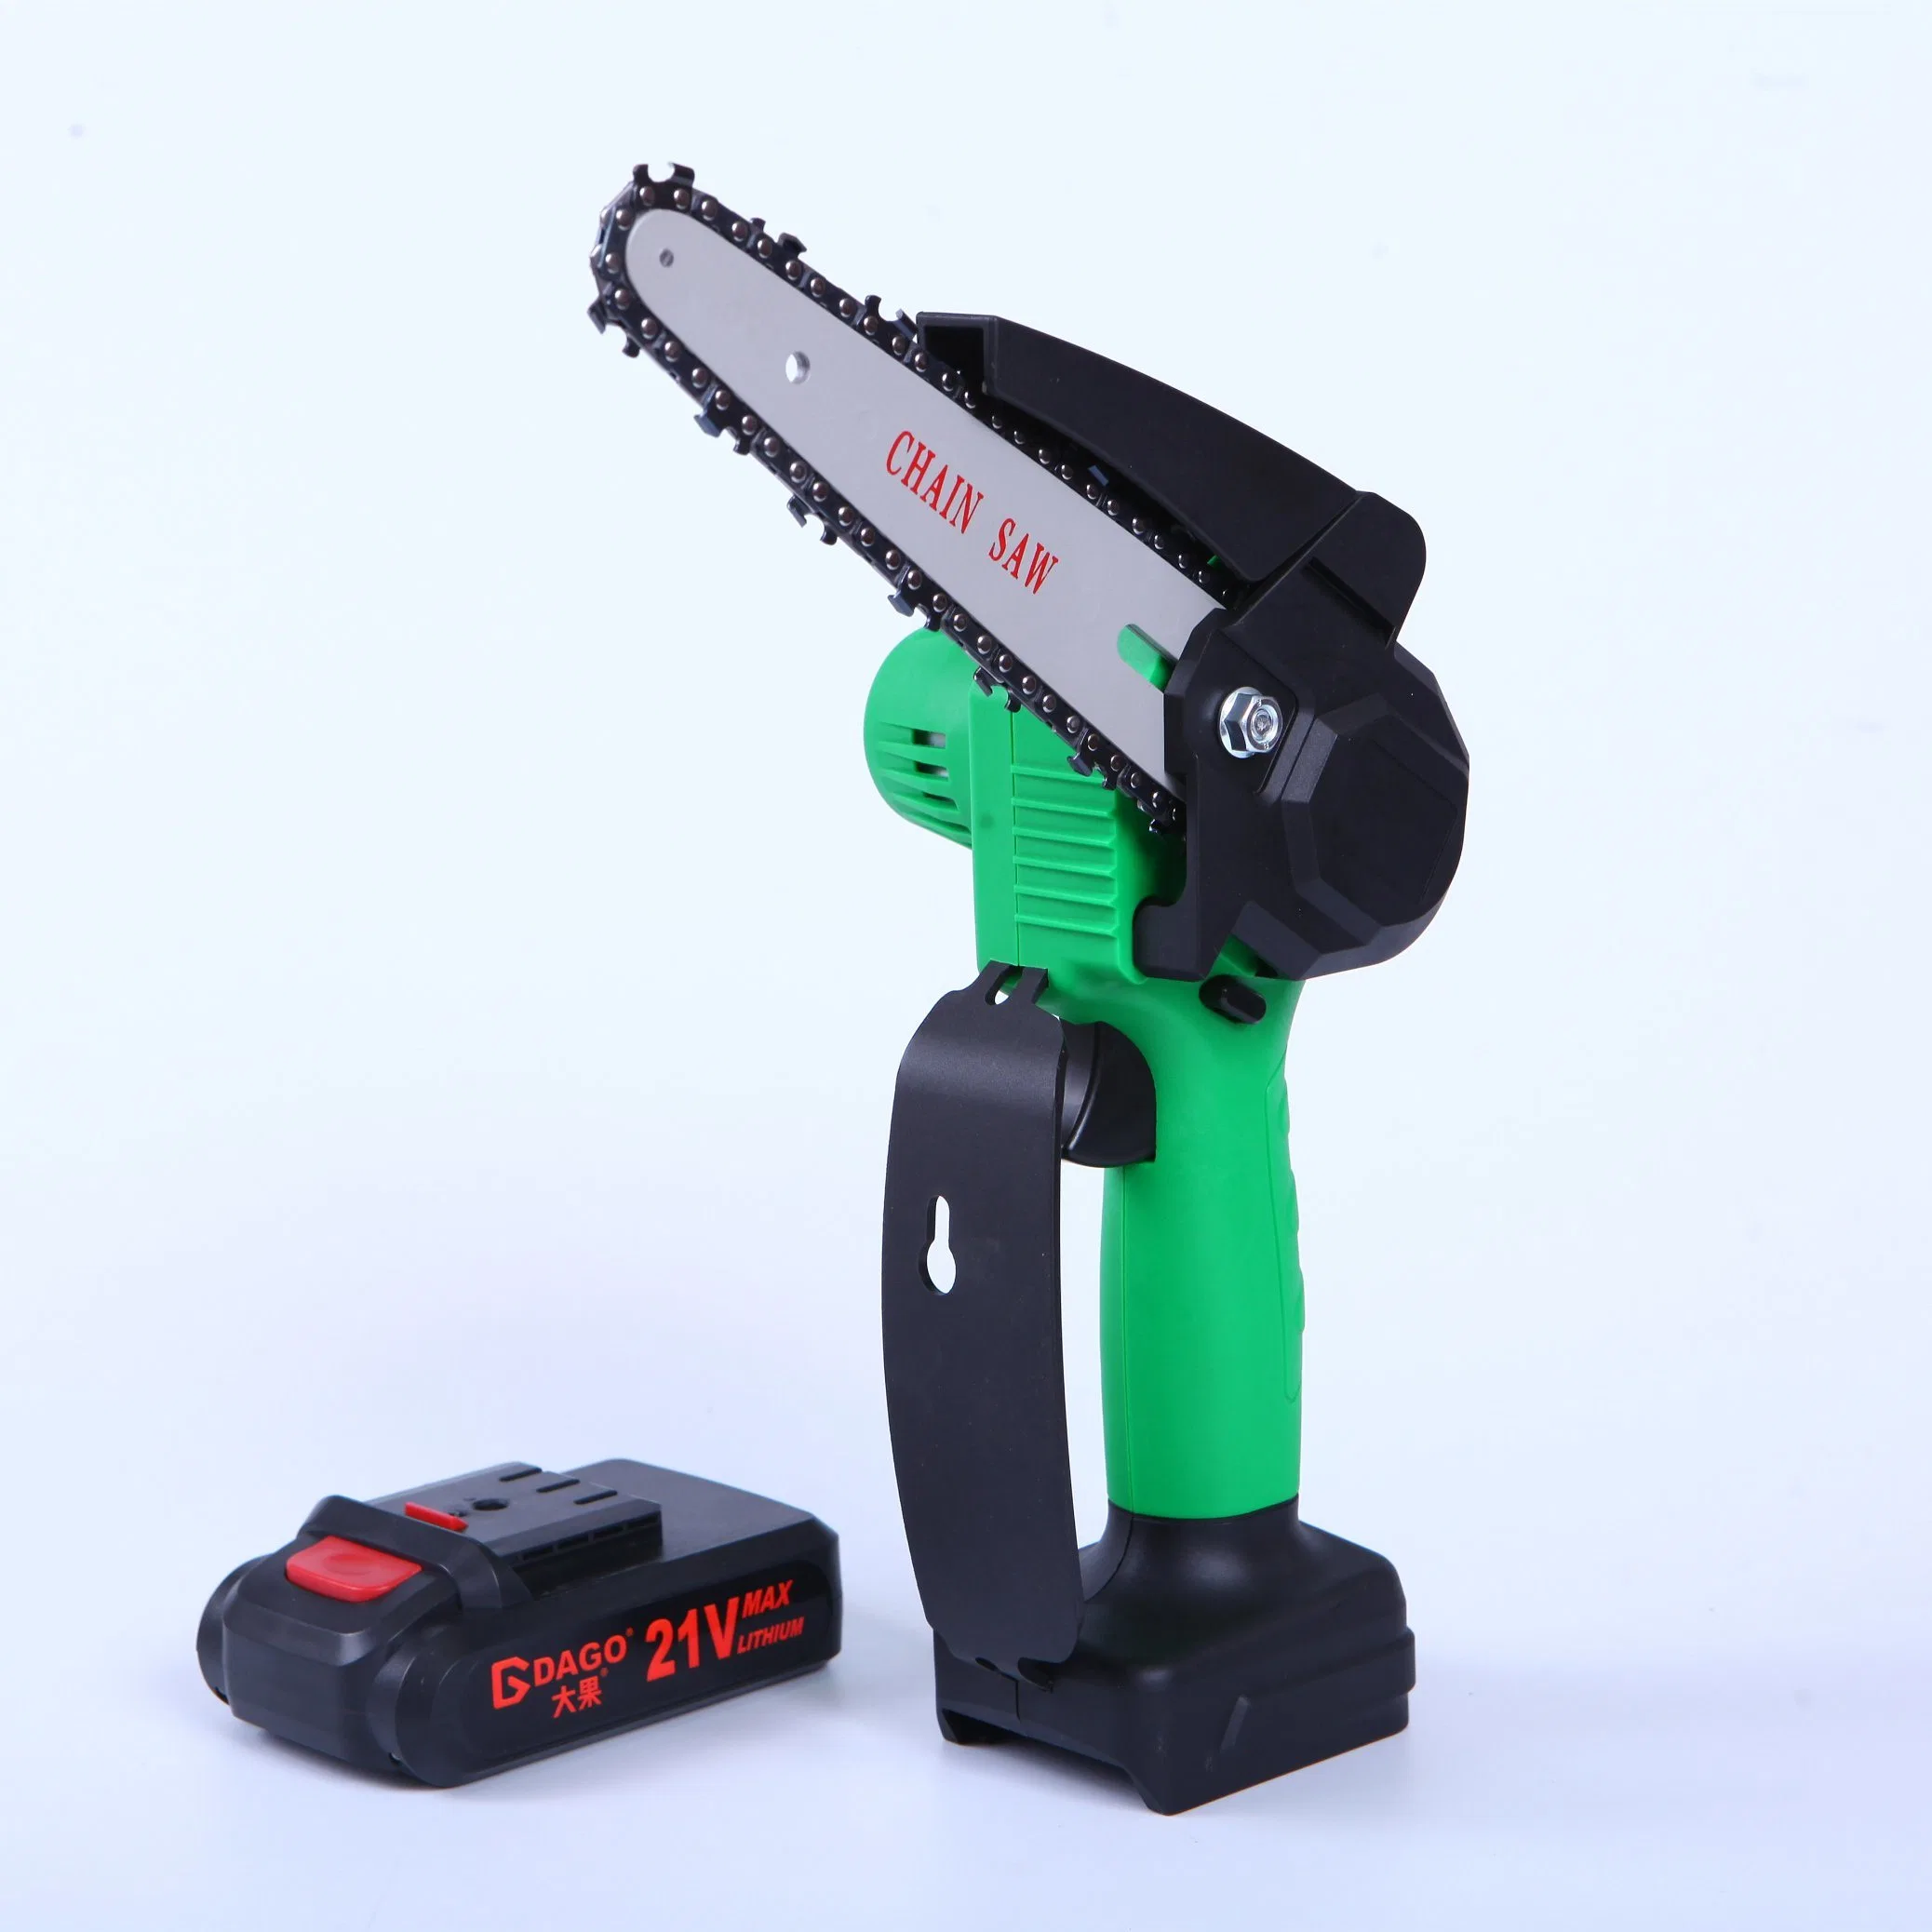 Lithium Battery Chain Saw with Stable Quality